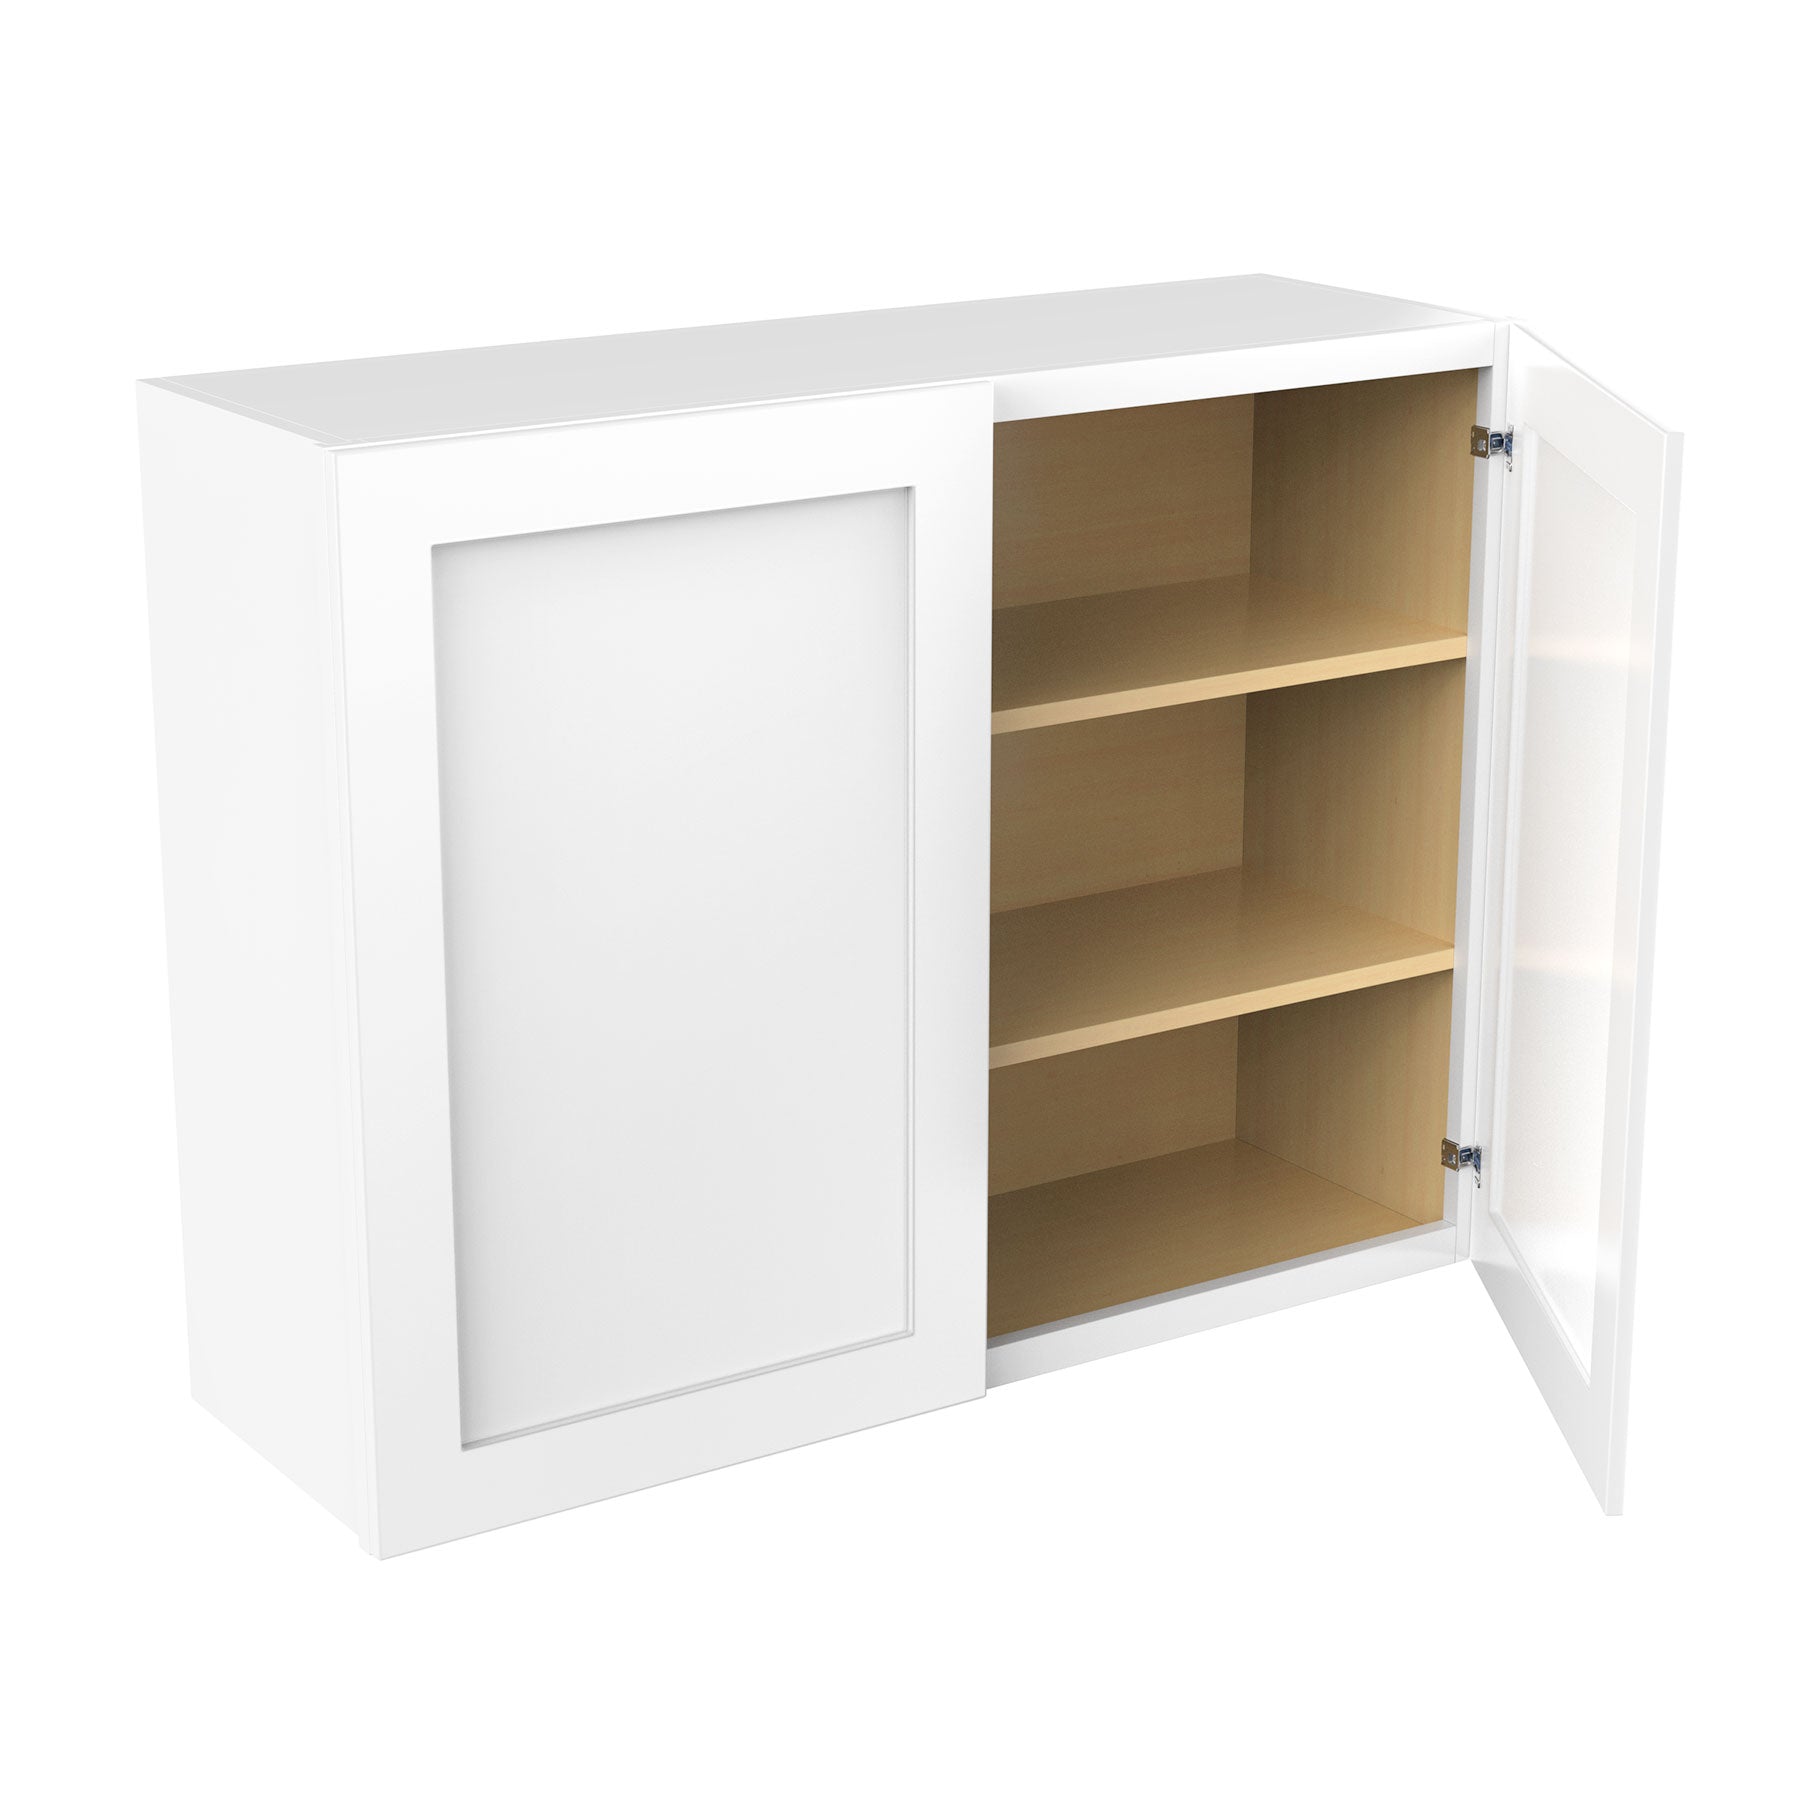 RTA - Elegant White - 30" High Double Door Wall Cabinet | 39"W x 30"H x 12"D